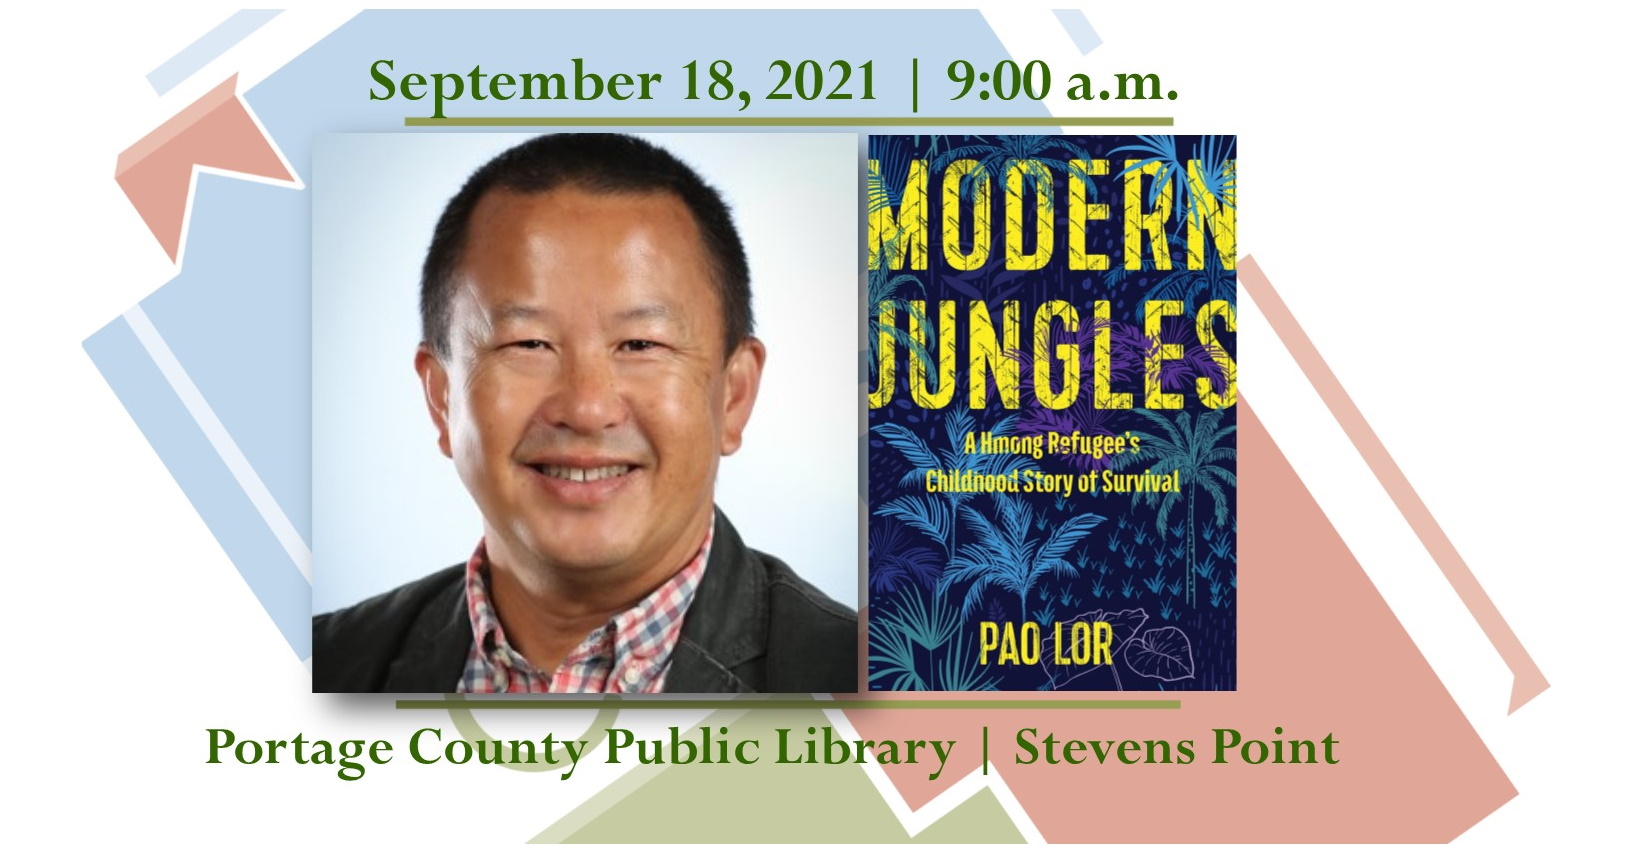 Pao Lor, author of Modern Jungles